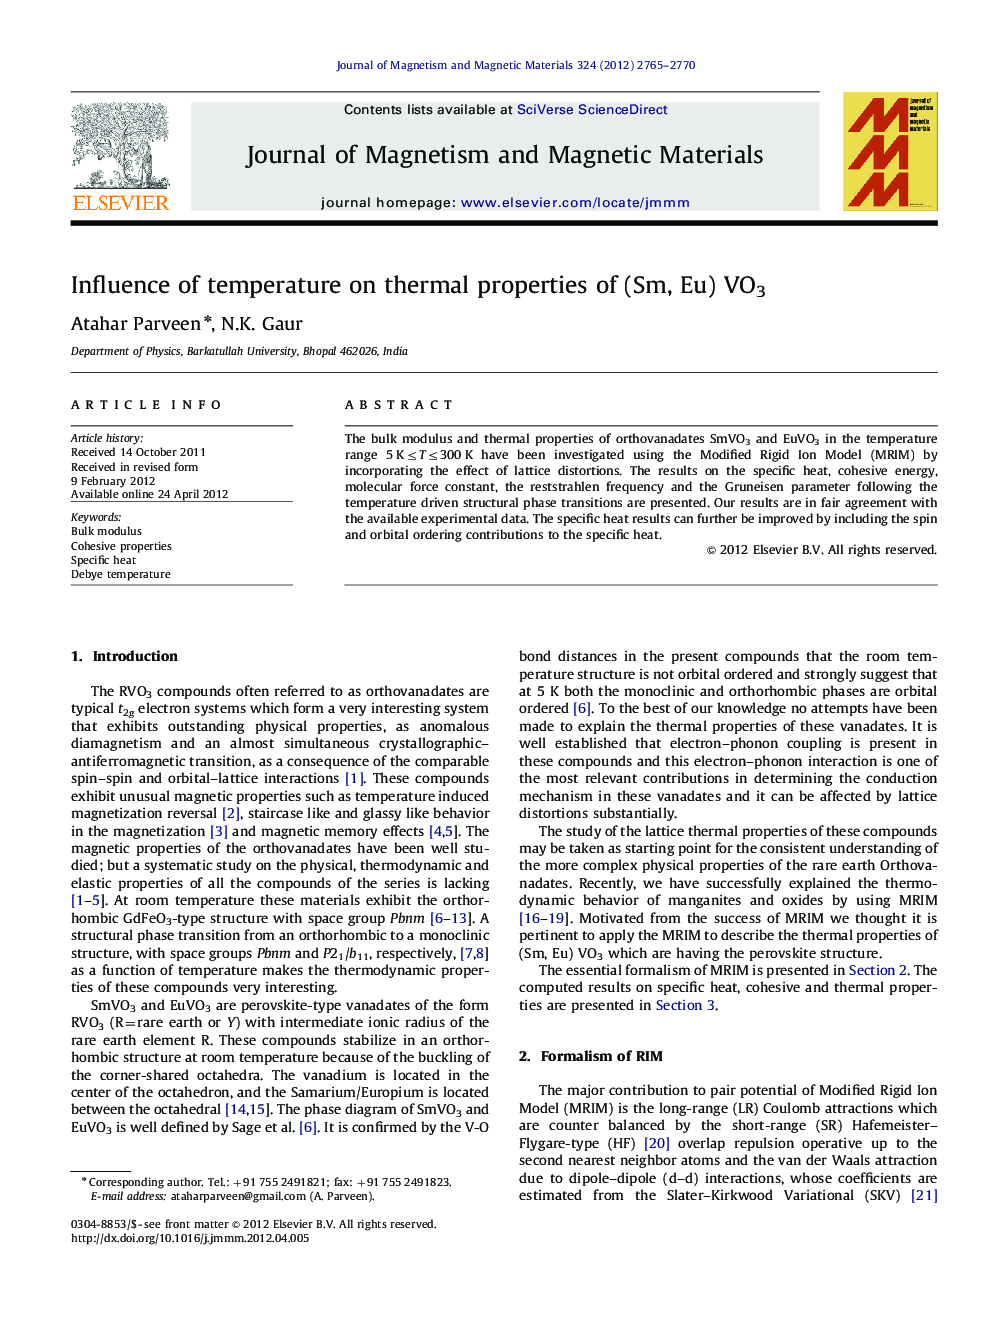 Influence of temperature on thermal properties of (Sm, Eu) VO3